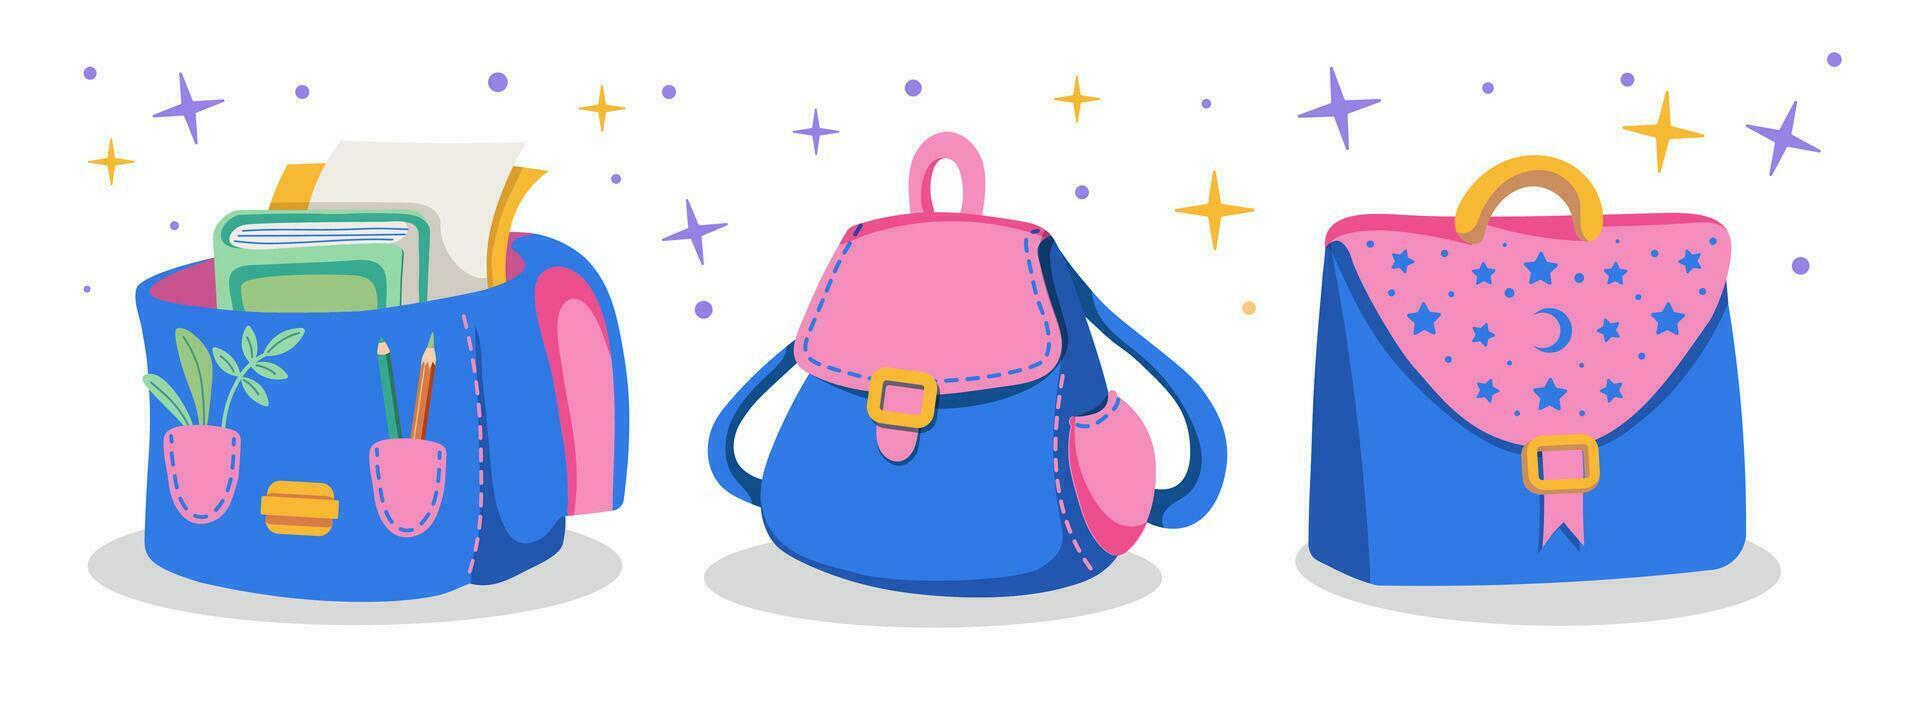 Set of backpacks in style of 90s. School equipment icons. Pink color. Vector Flat illustration.